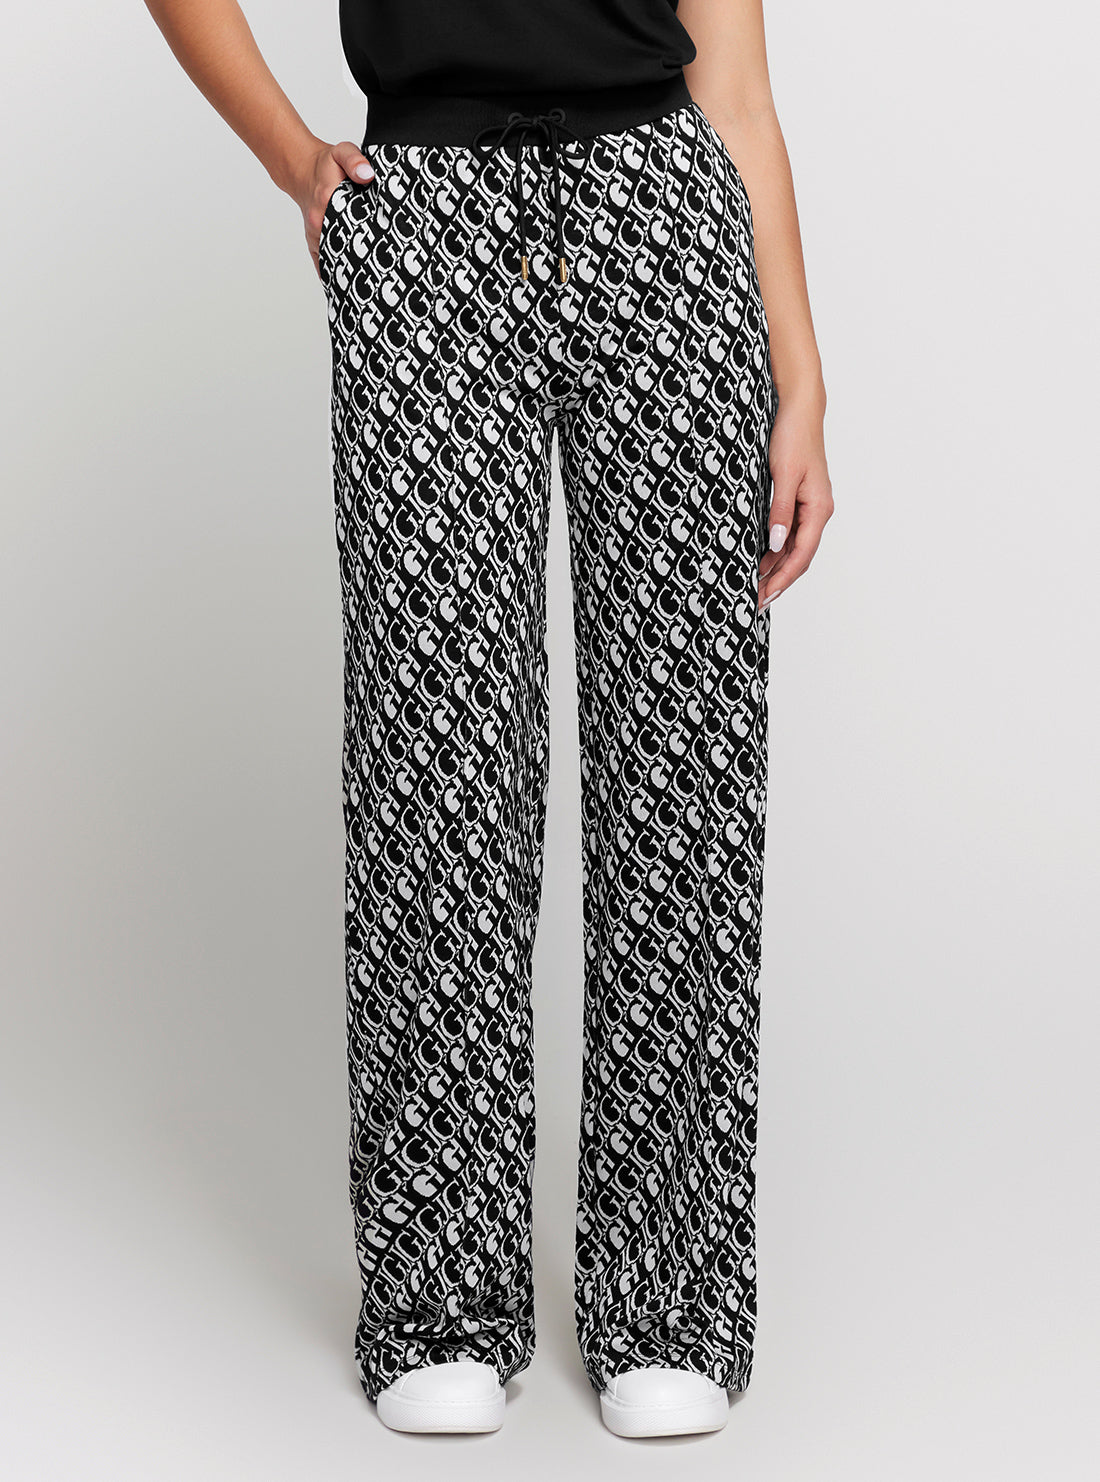 GUESS Black White Logo Straight Long Pant front view